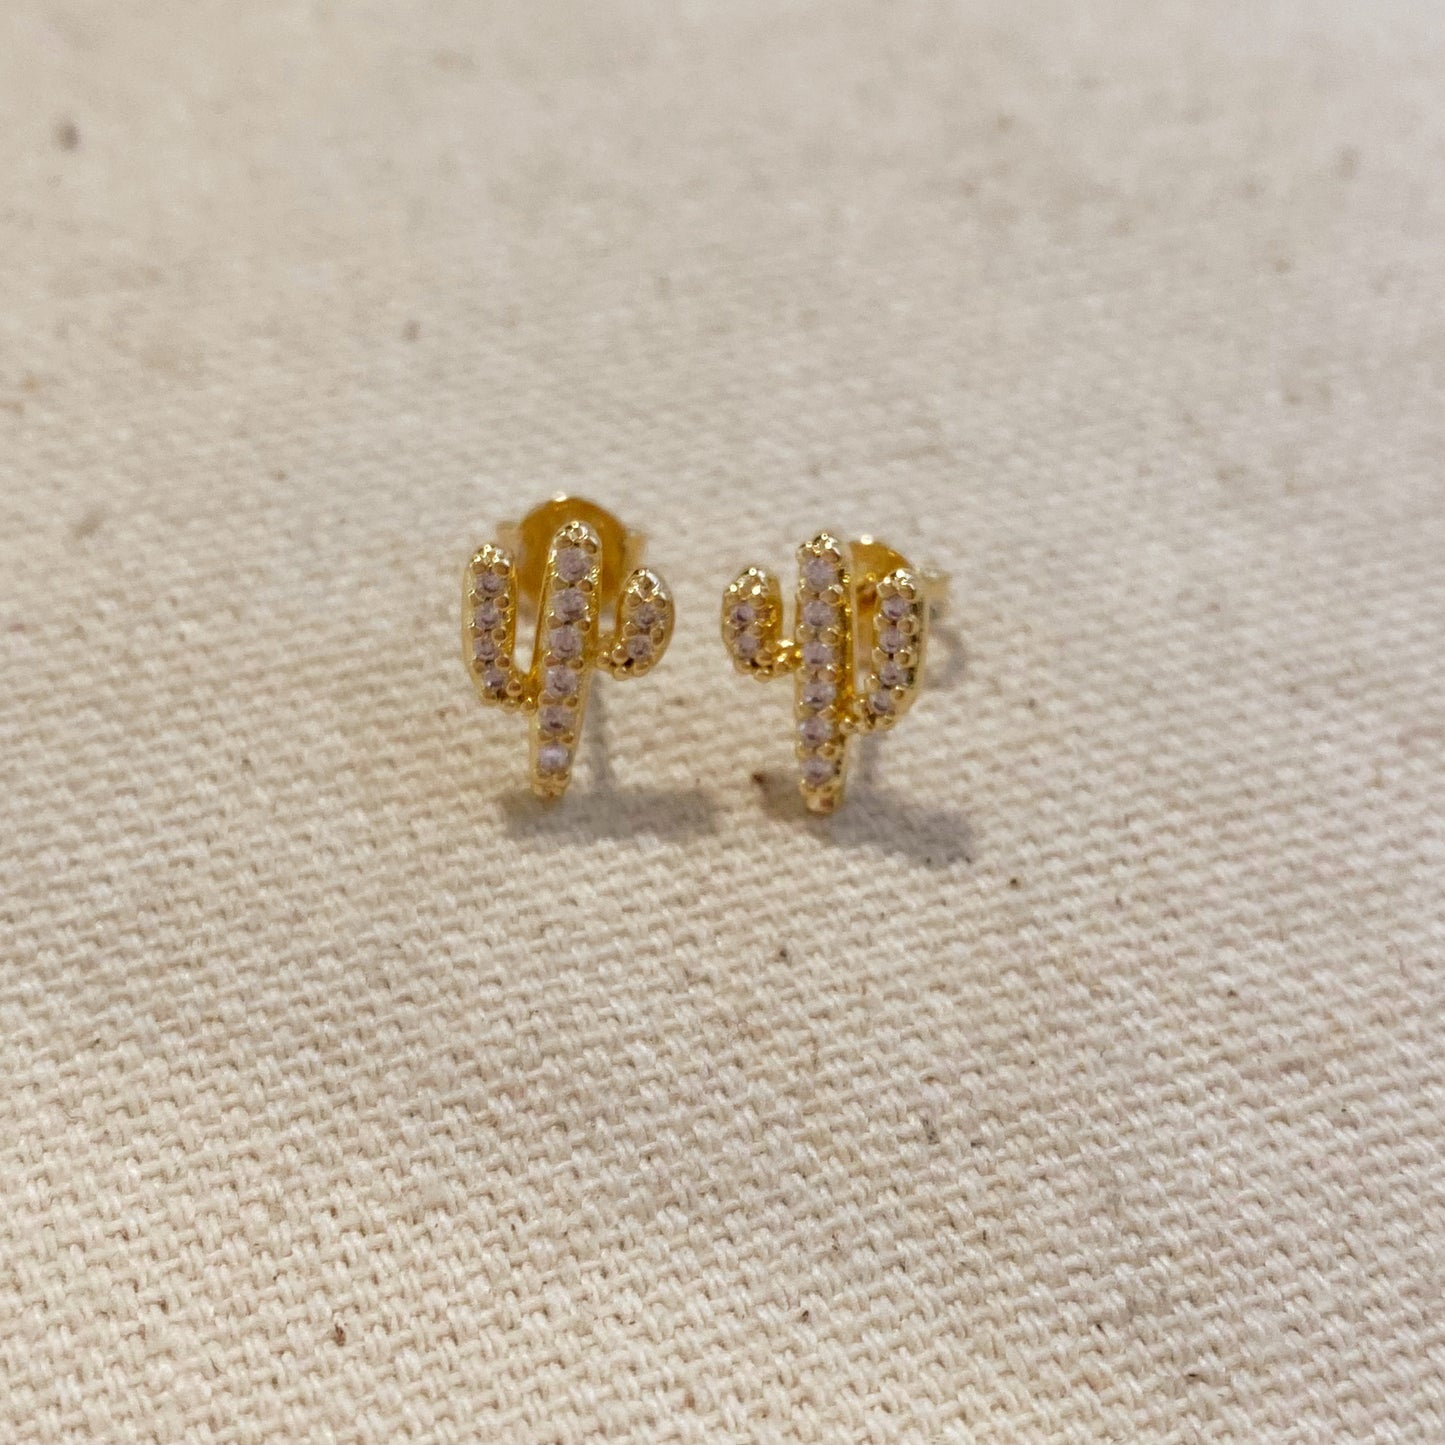 18k Gold Filled Cactus Stud Earrings With Micro Cubic Zirconia Stones